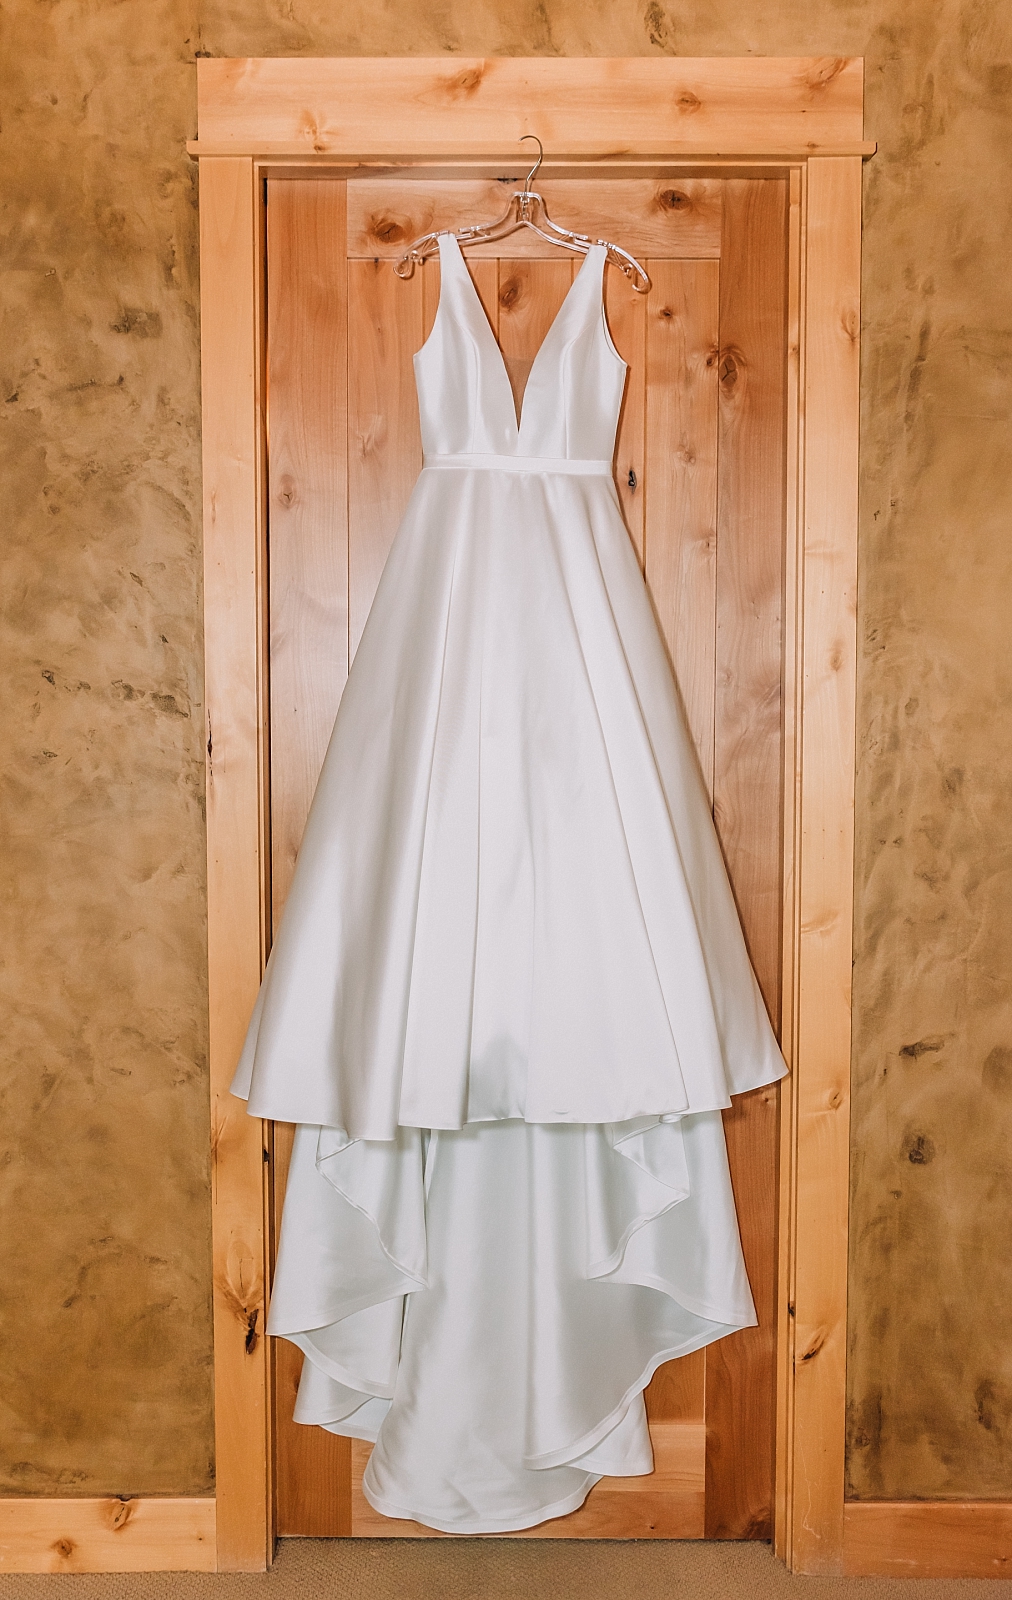 classic and timeless satin wedding dress, simple and elegant dresses, dreamy wedding details